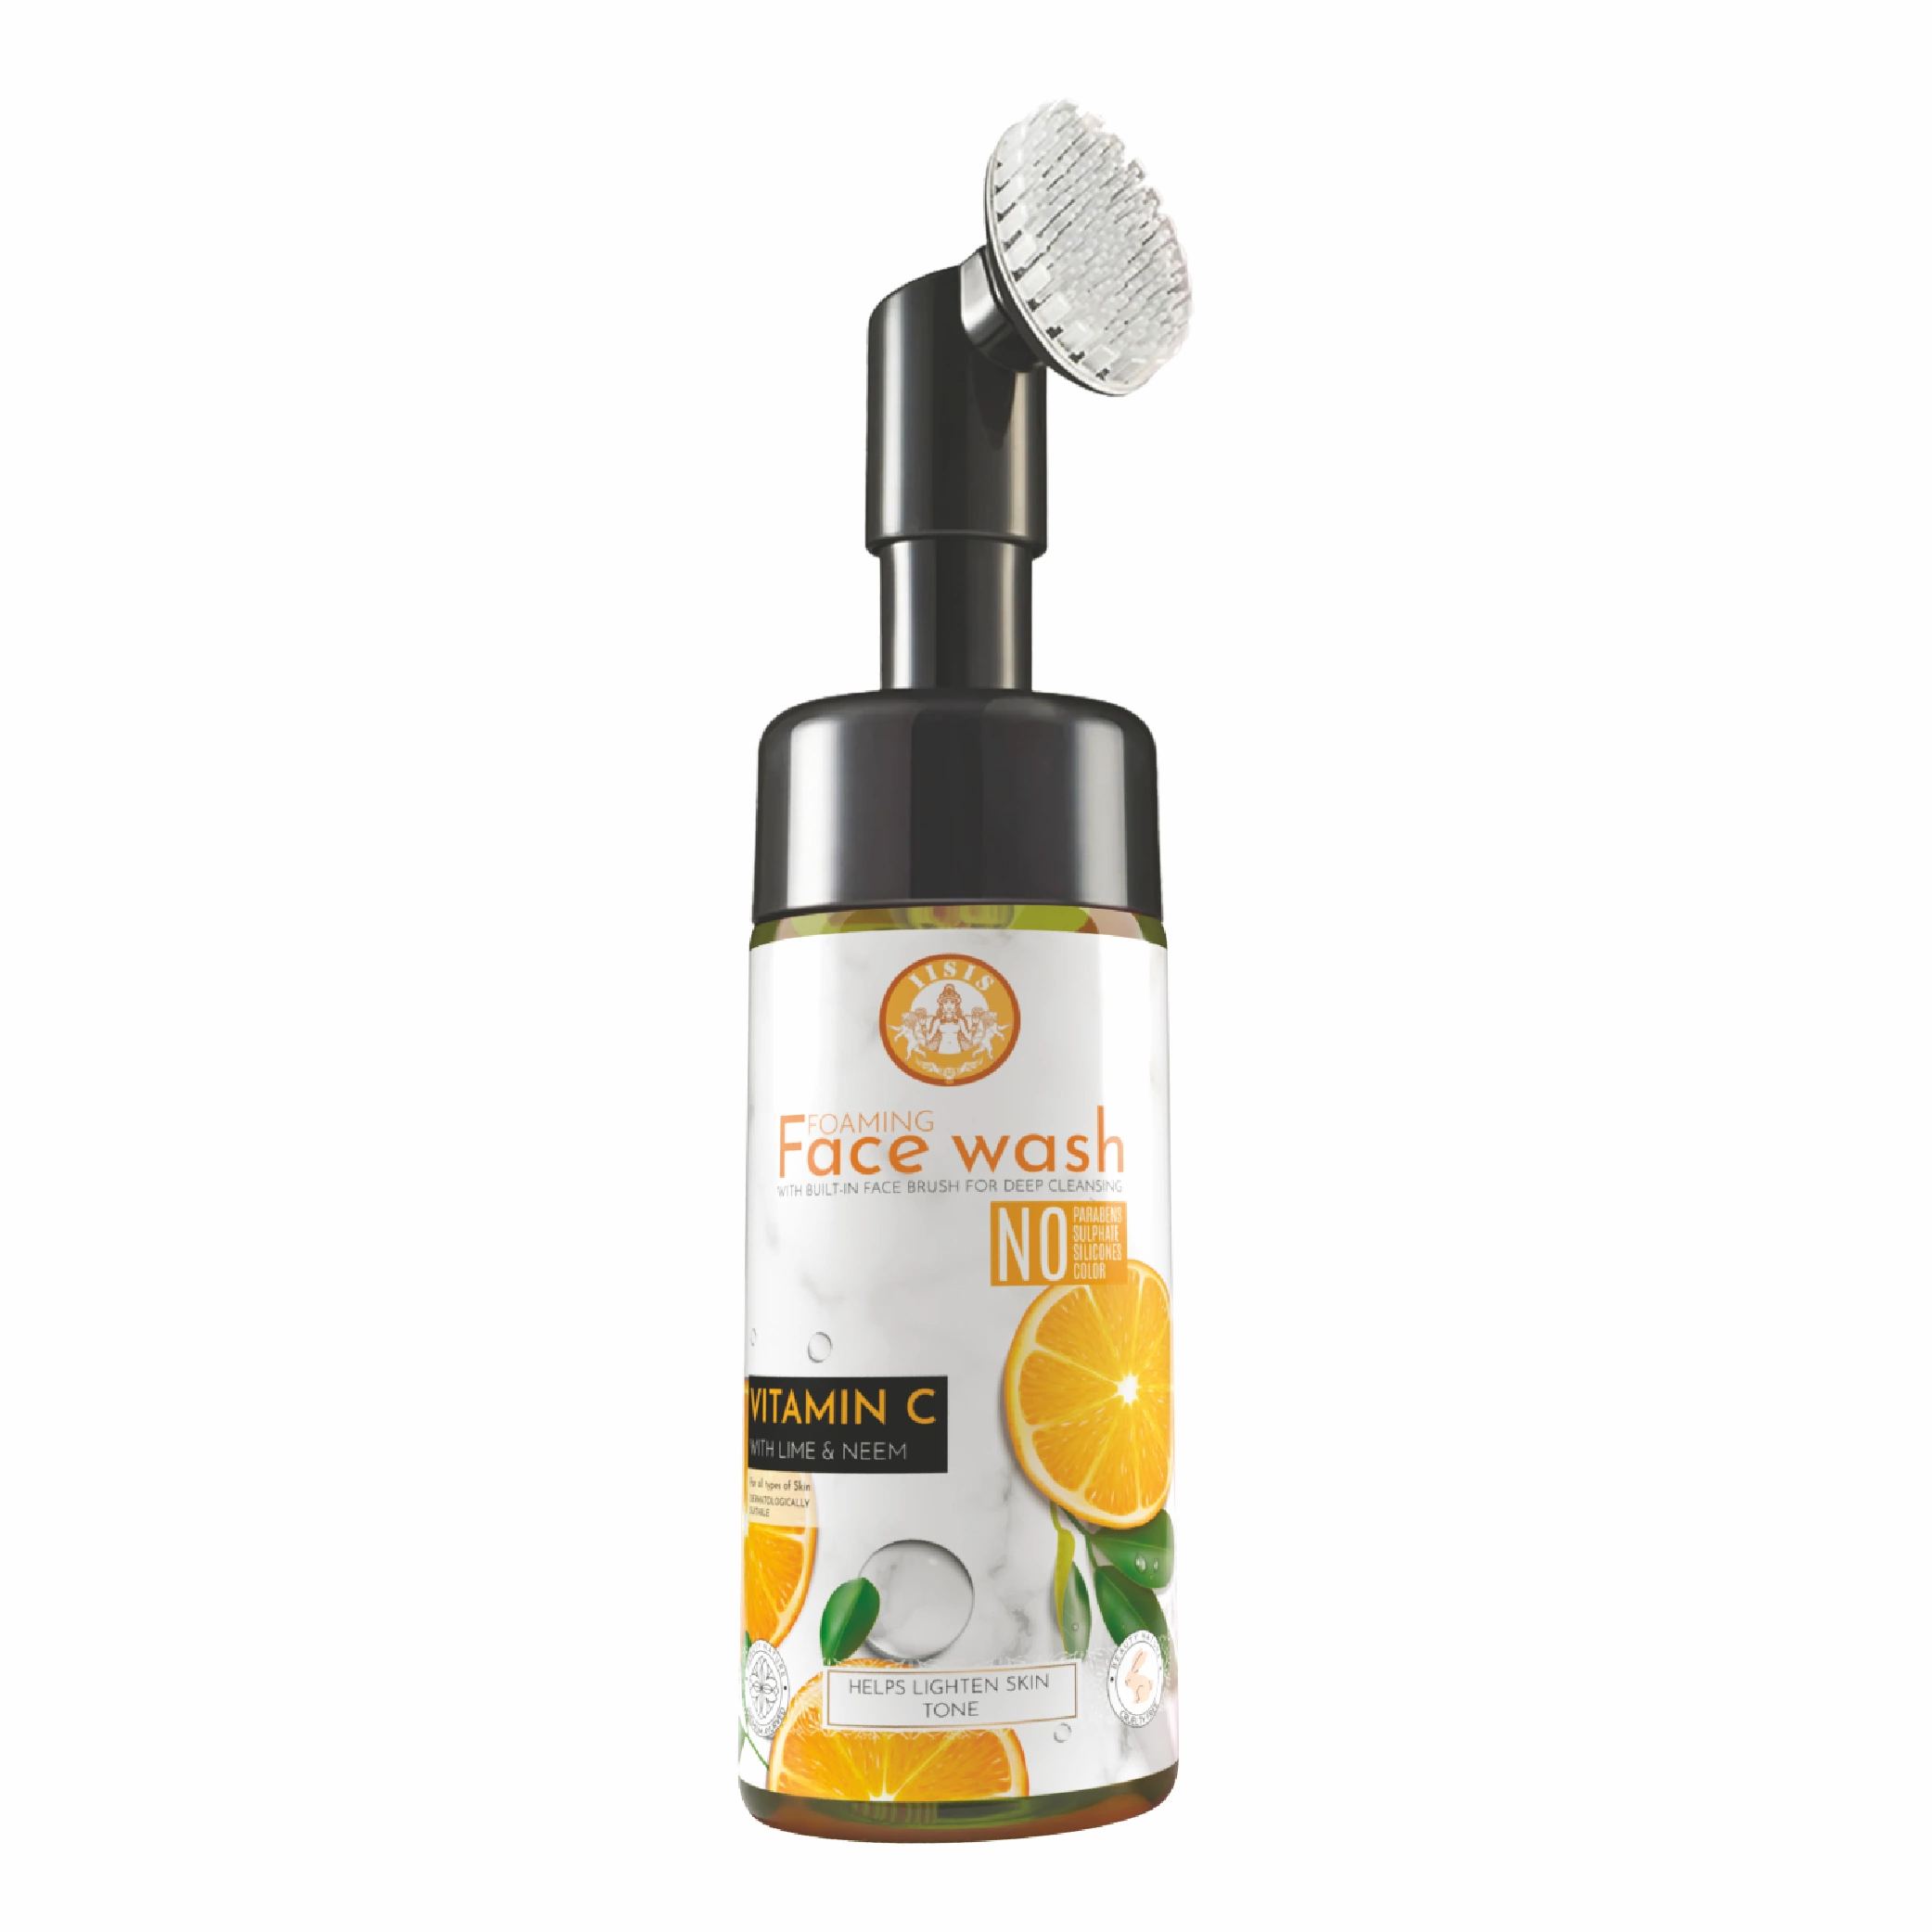 SCBV B2B Vitamin C With Lime & Neem Foaming Face Wash With Built-In Face Brush (150ml)- 12 Pcs.